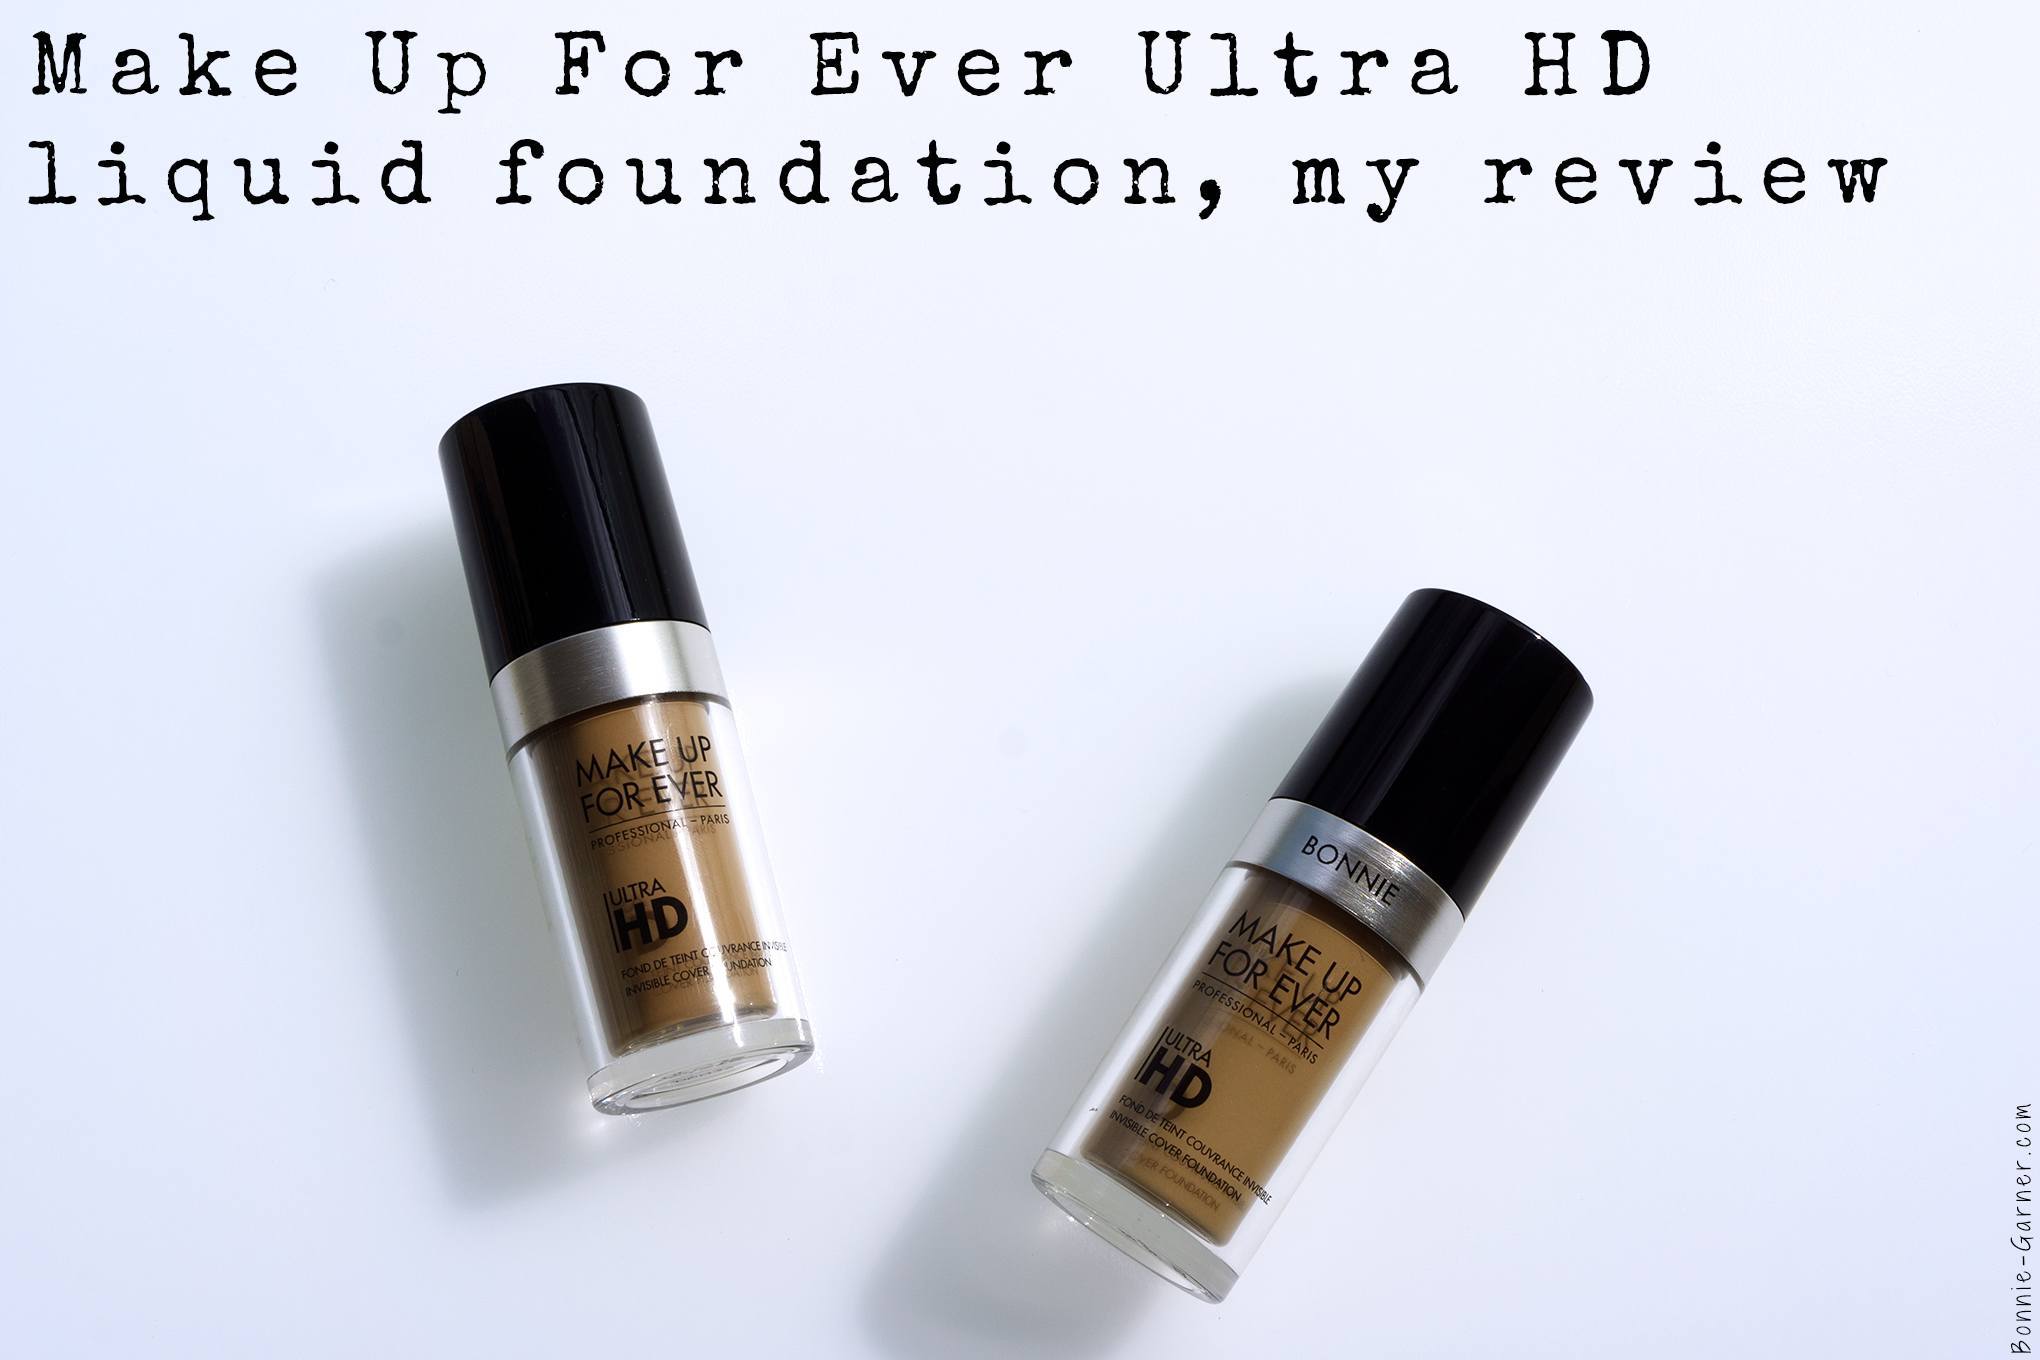 Make Up For Ever Ultra HD liquid foundation, my review